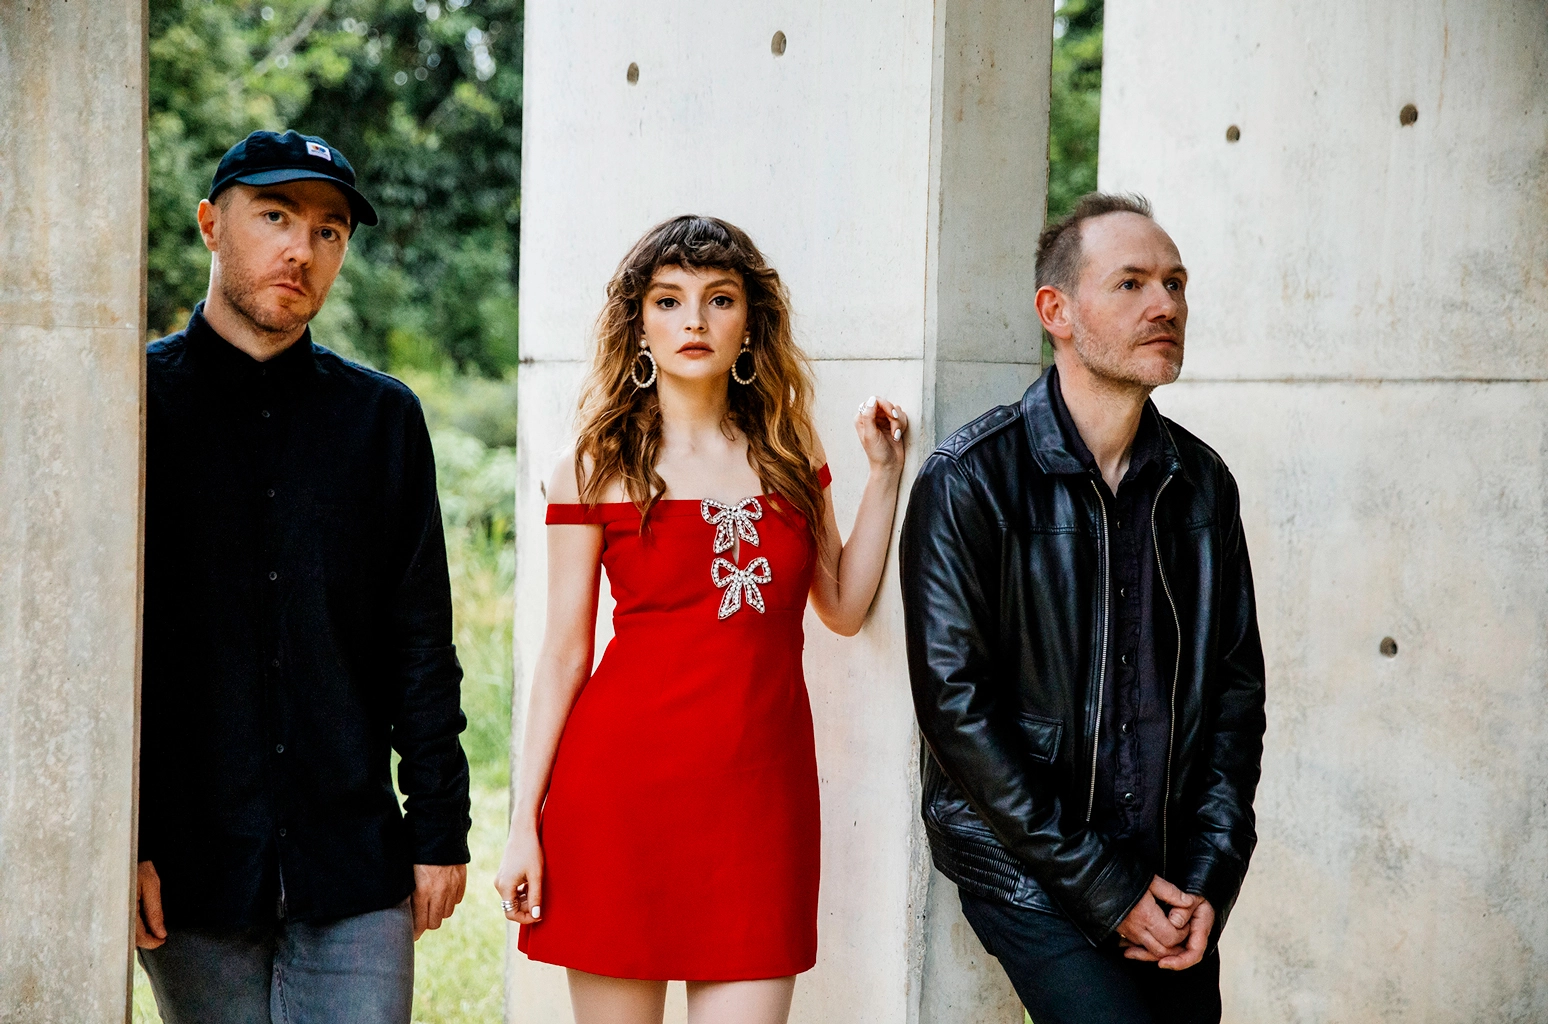 Chvrches will support Coldplay in Manchester